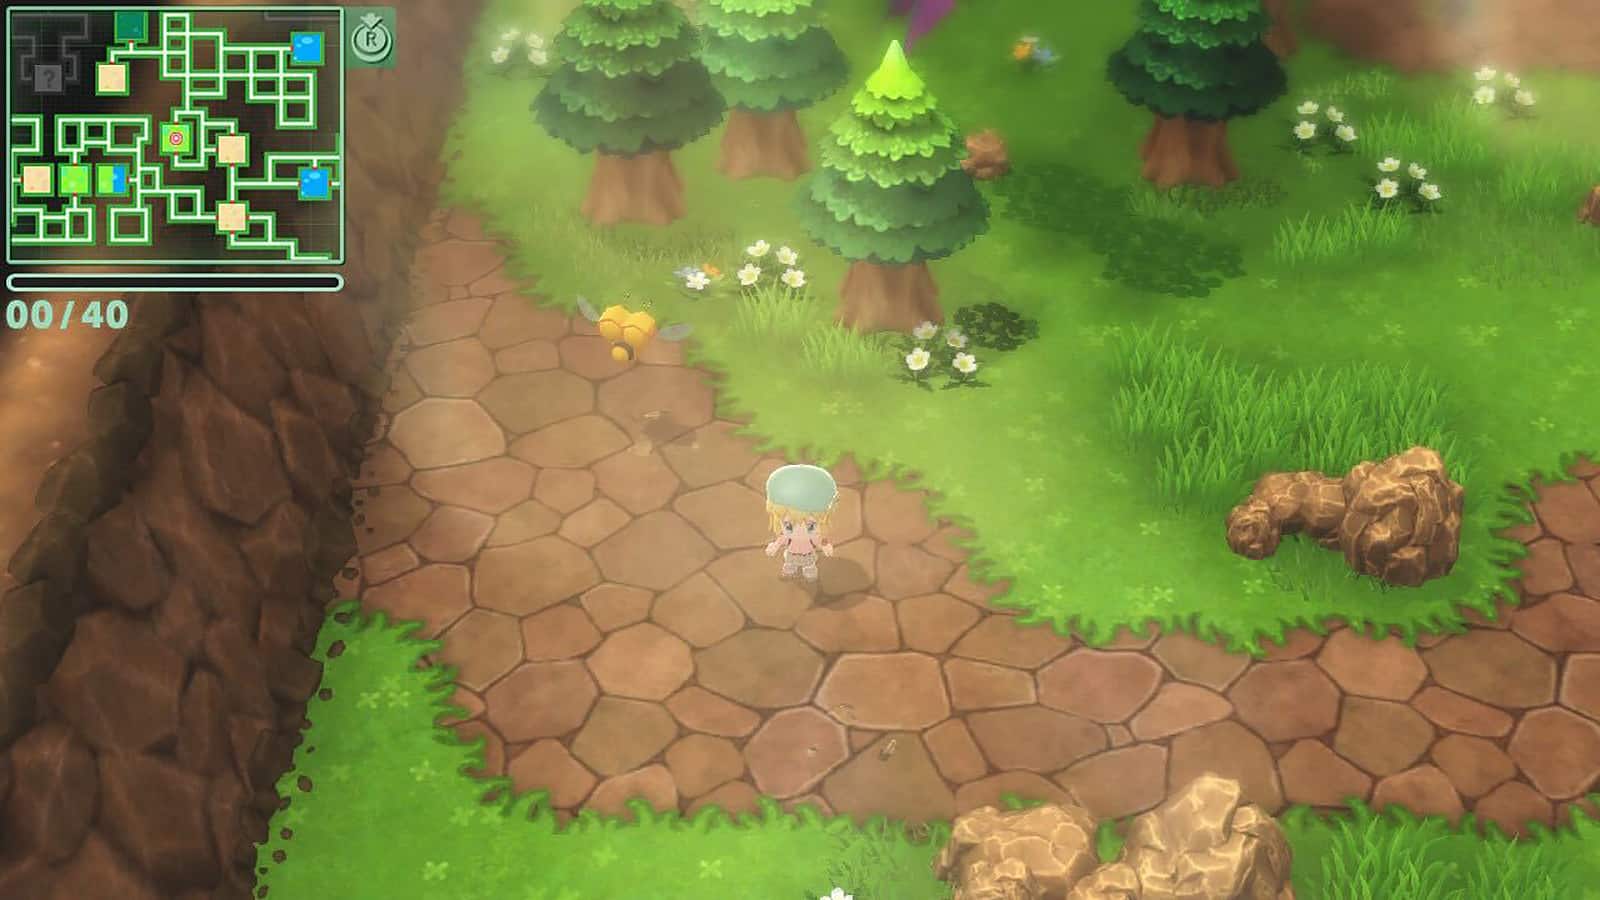 An image of Combee & Dawn, one of the locations where you can find the Pokemon in Brilliant Diamond & Shining Pearl